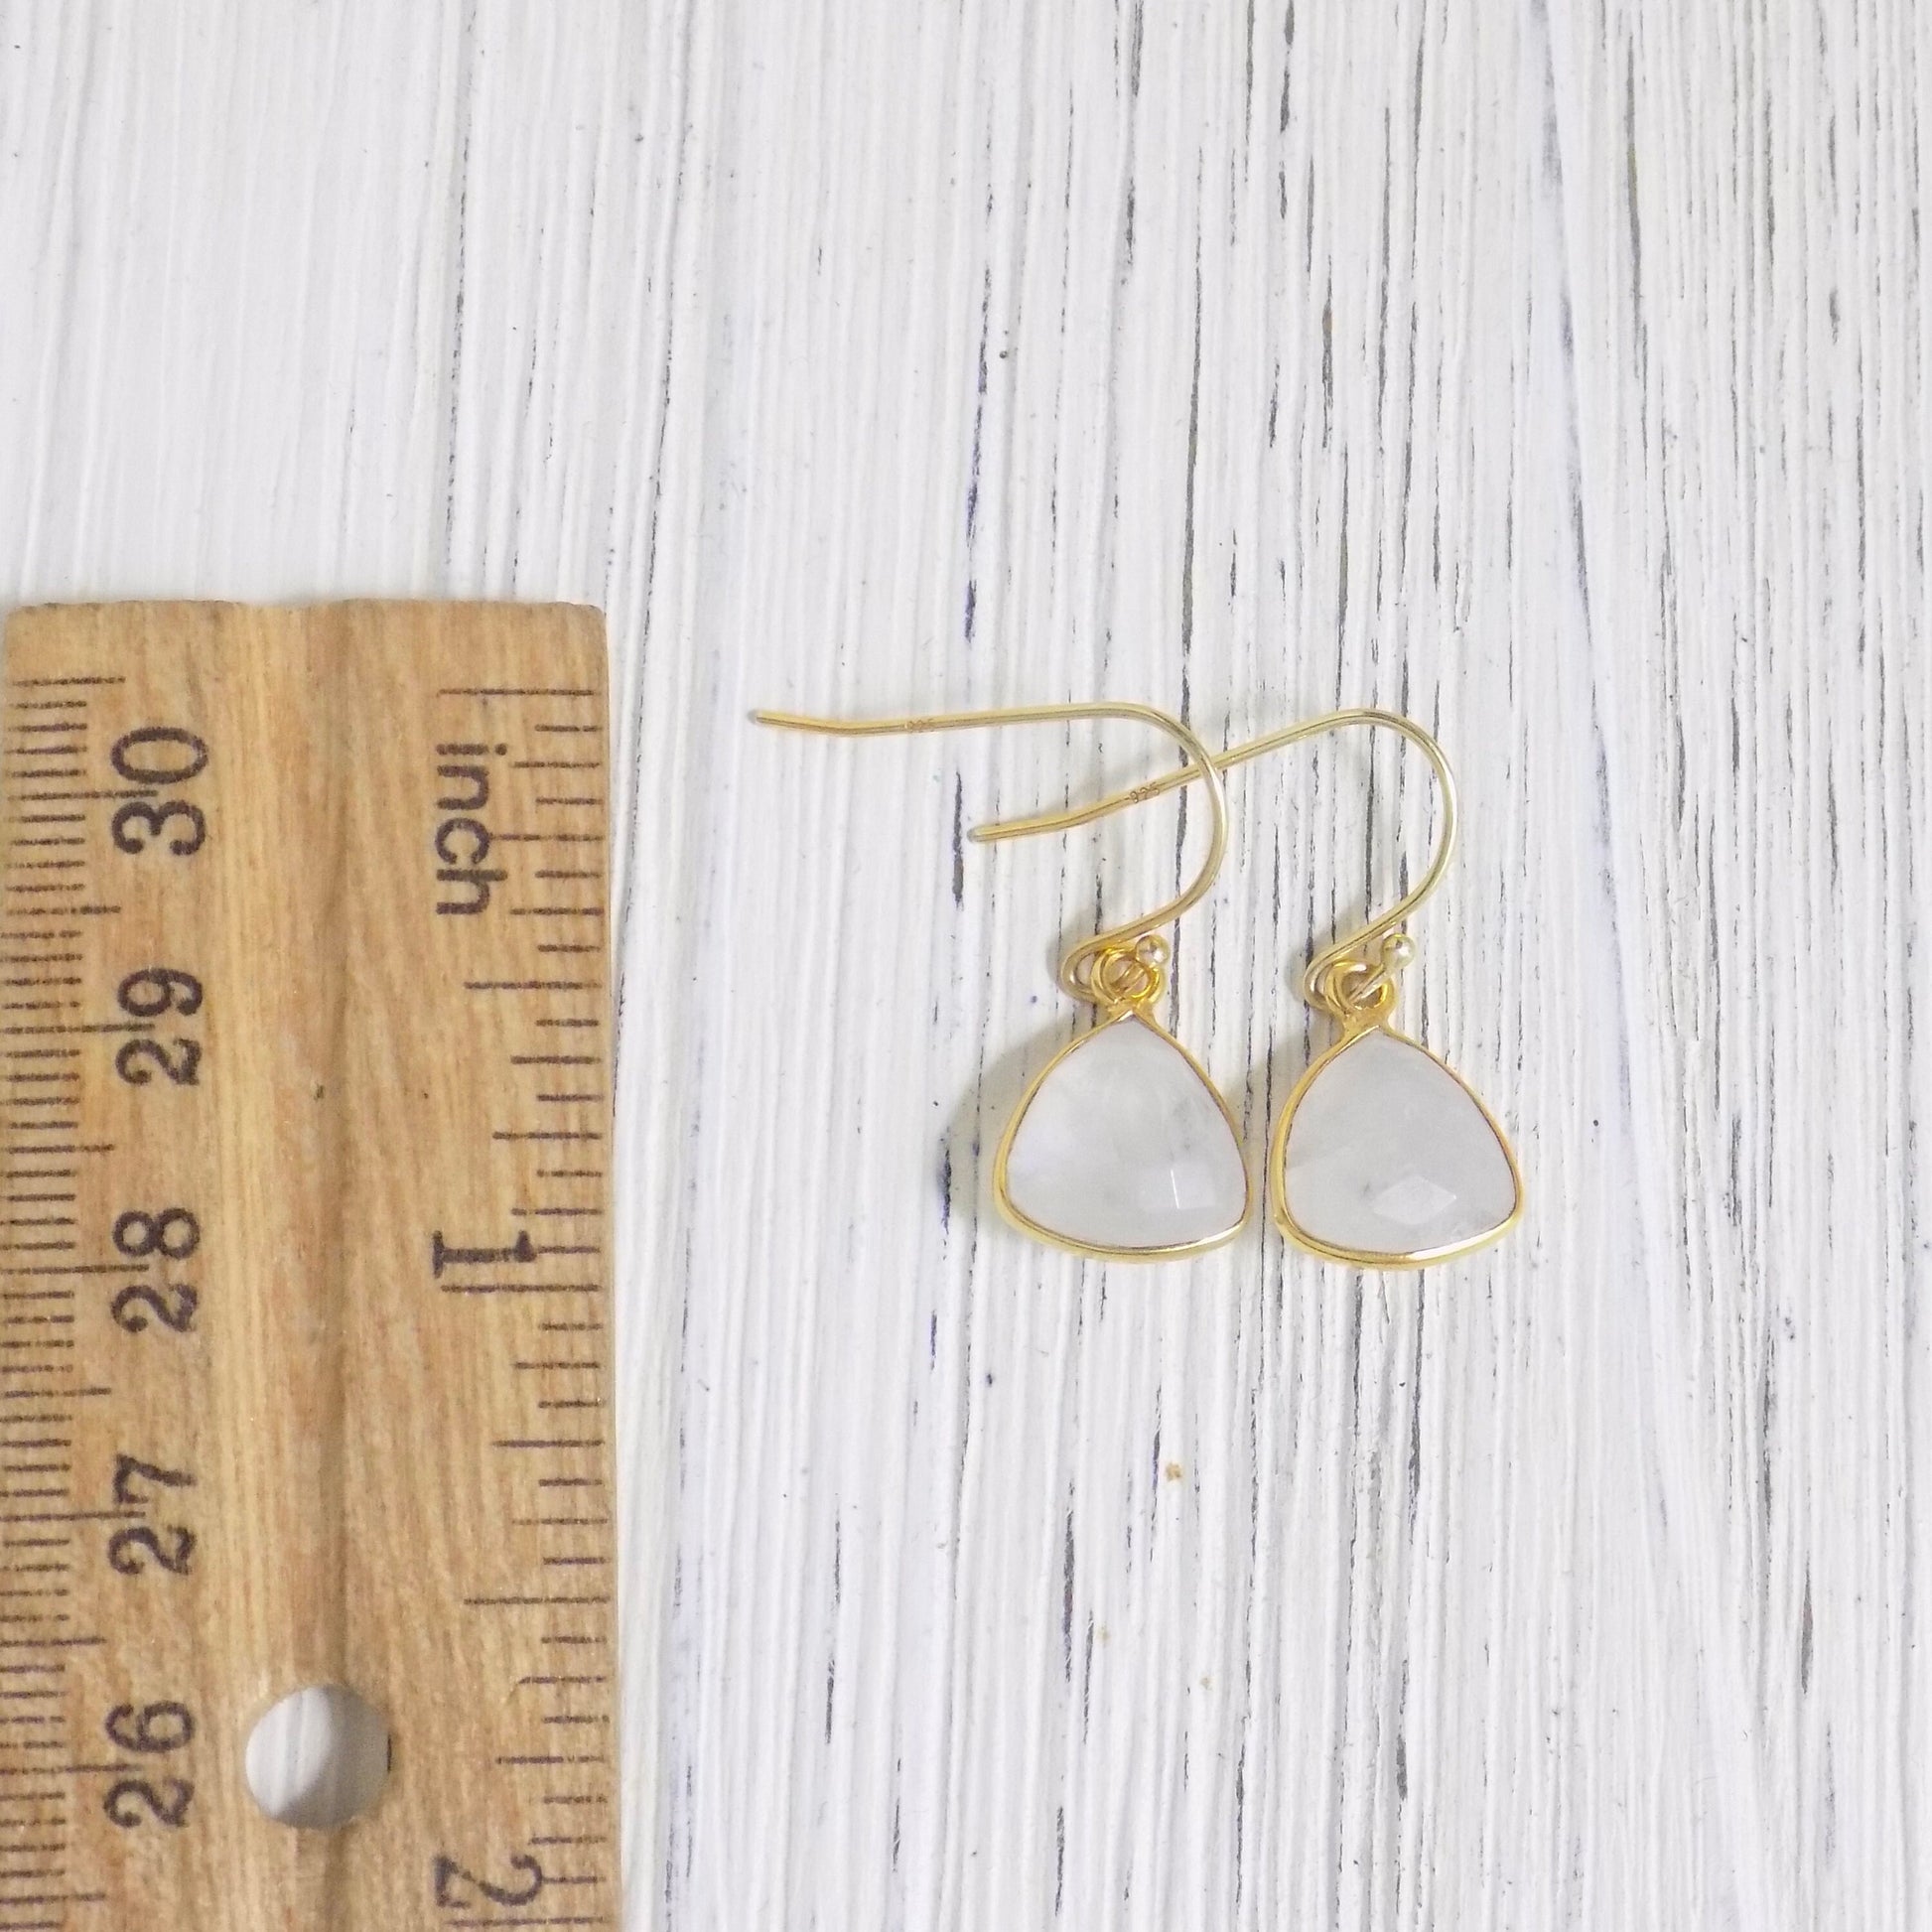 White Moonstone Earrings Gold, Unique Moonstone Dangle Earring, Minimalist Bridal Jewelry, Gift For Wife, M5-317